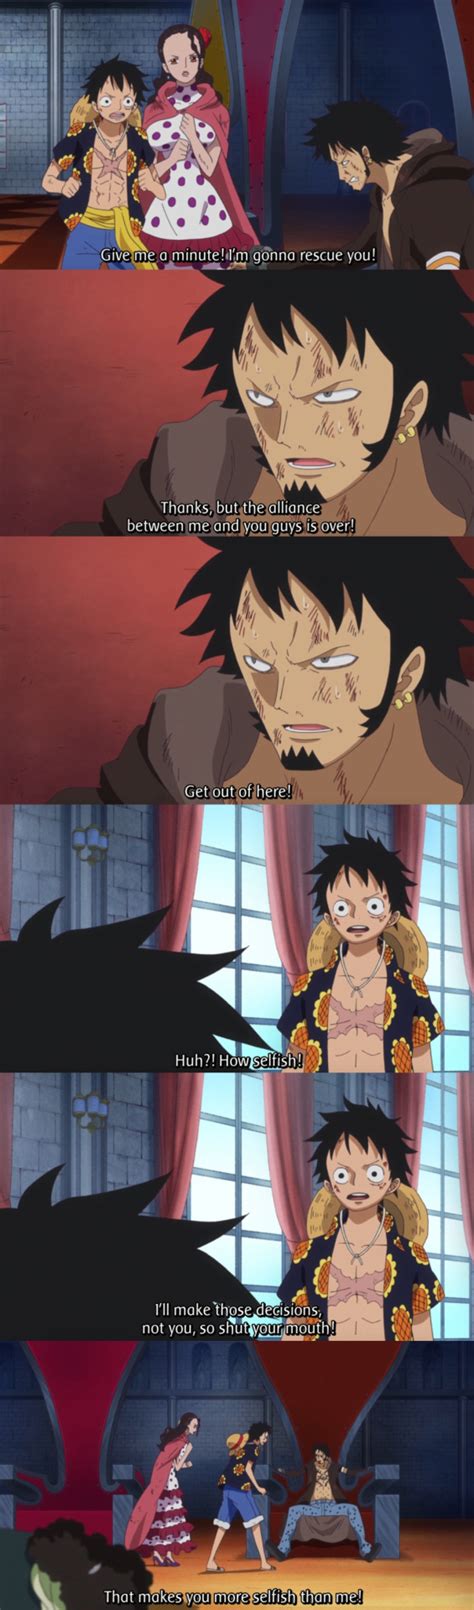 One Piece Quotes One Piece Meme One Piece Funny One Piece Comic One